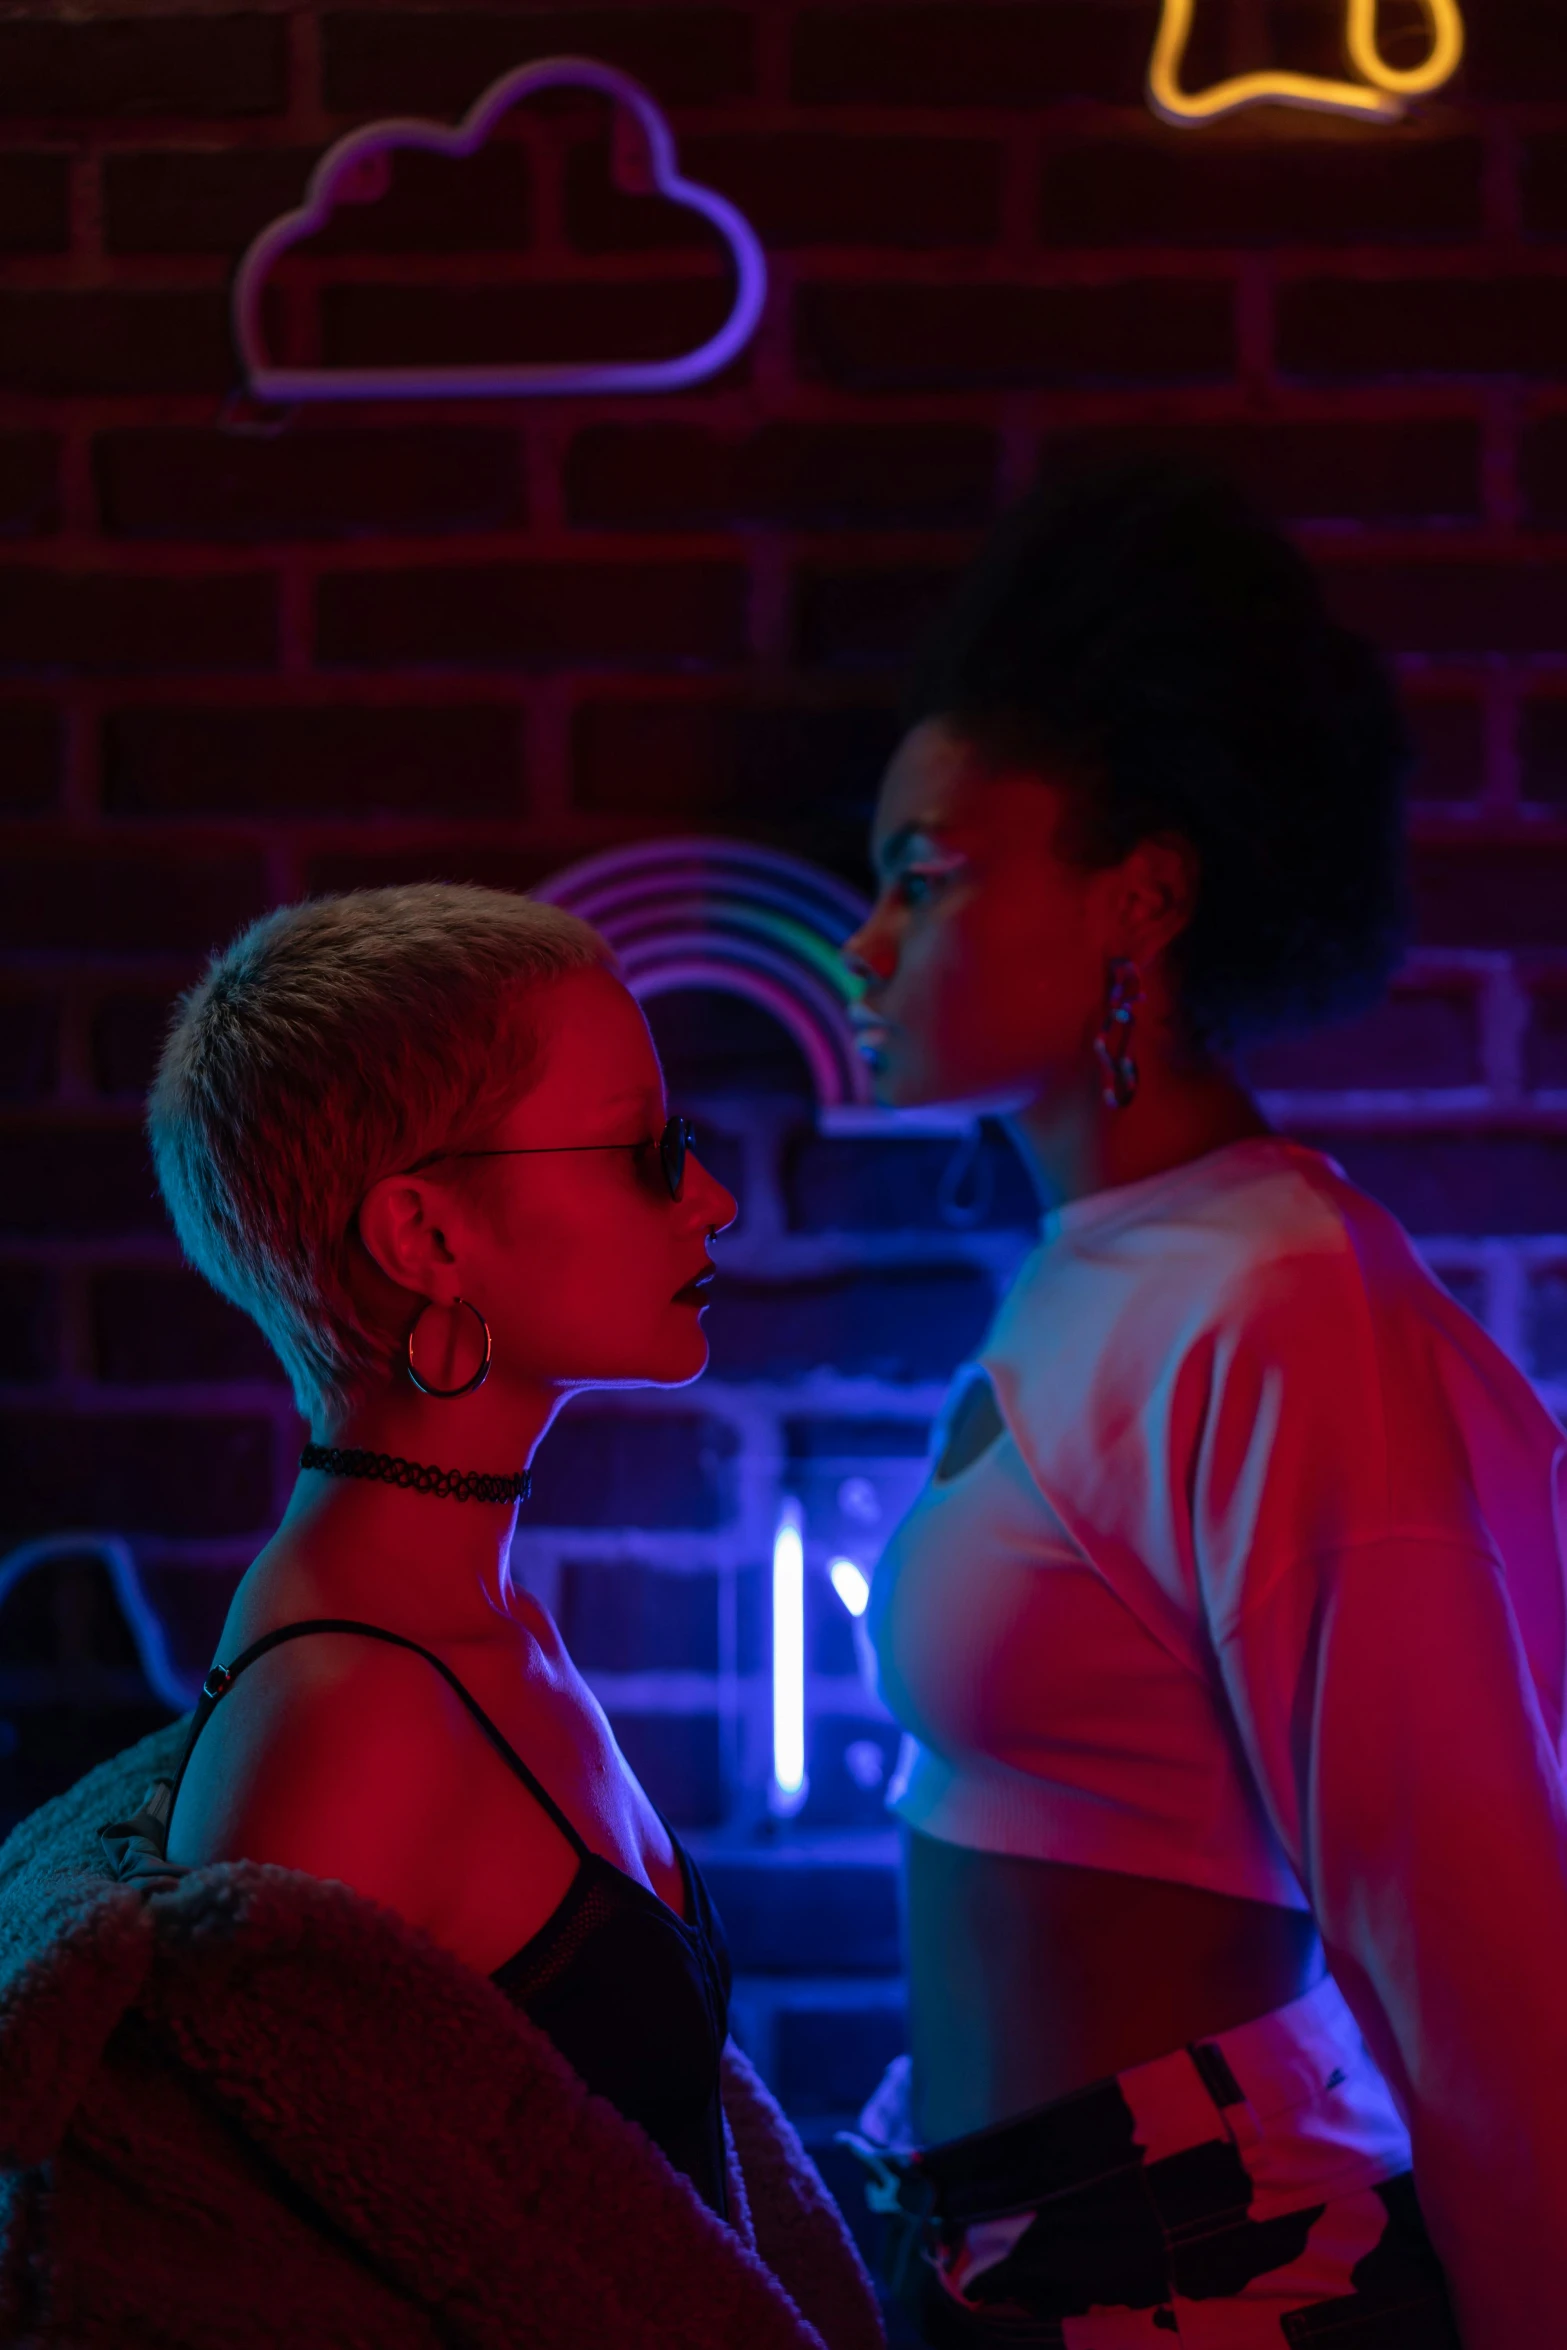 two women standing next to each other in front of neon signs, inspired by Nan Goldin, pexels, holography, willow smith zendaya, scene from fightclub movie, ( ( theatrical ) ), flirting